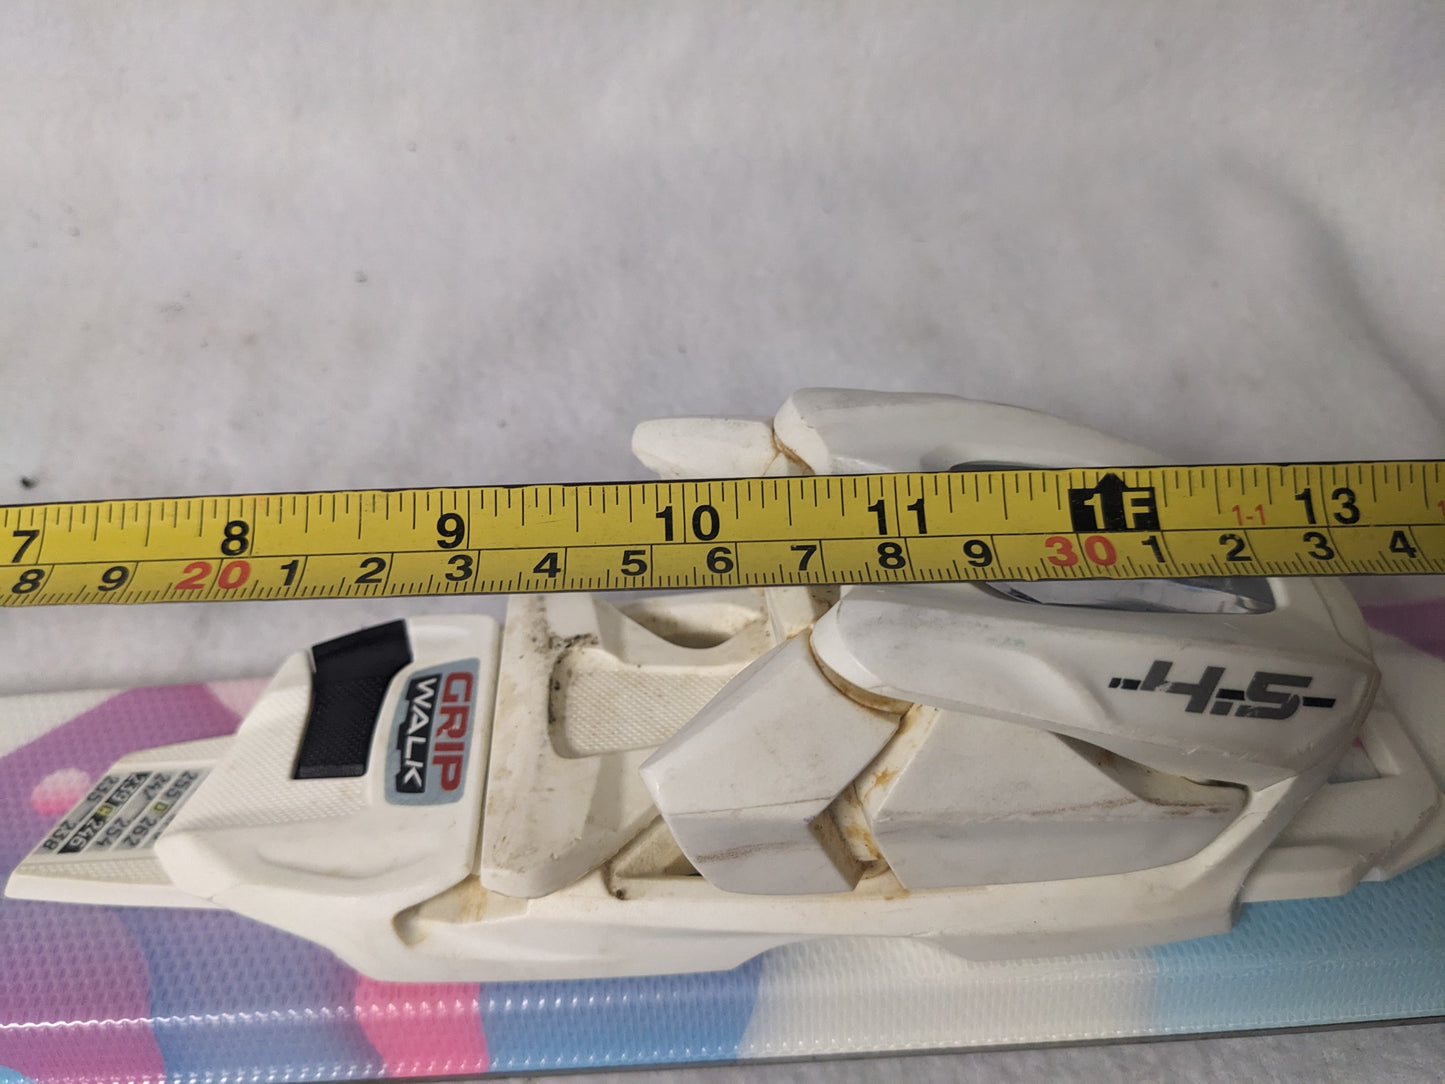 Volkl Chica Skis w/Marker Bindings Size 130 cm Color White Condition Used